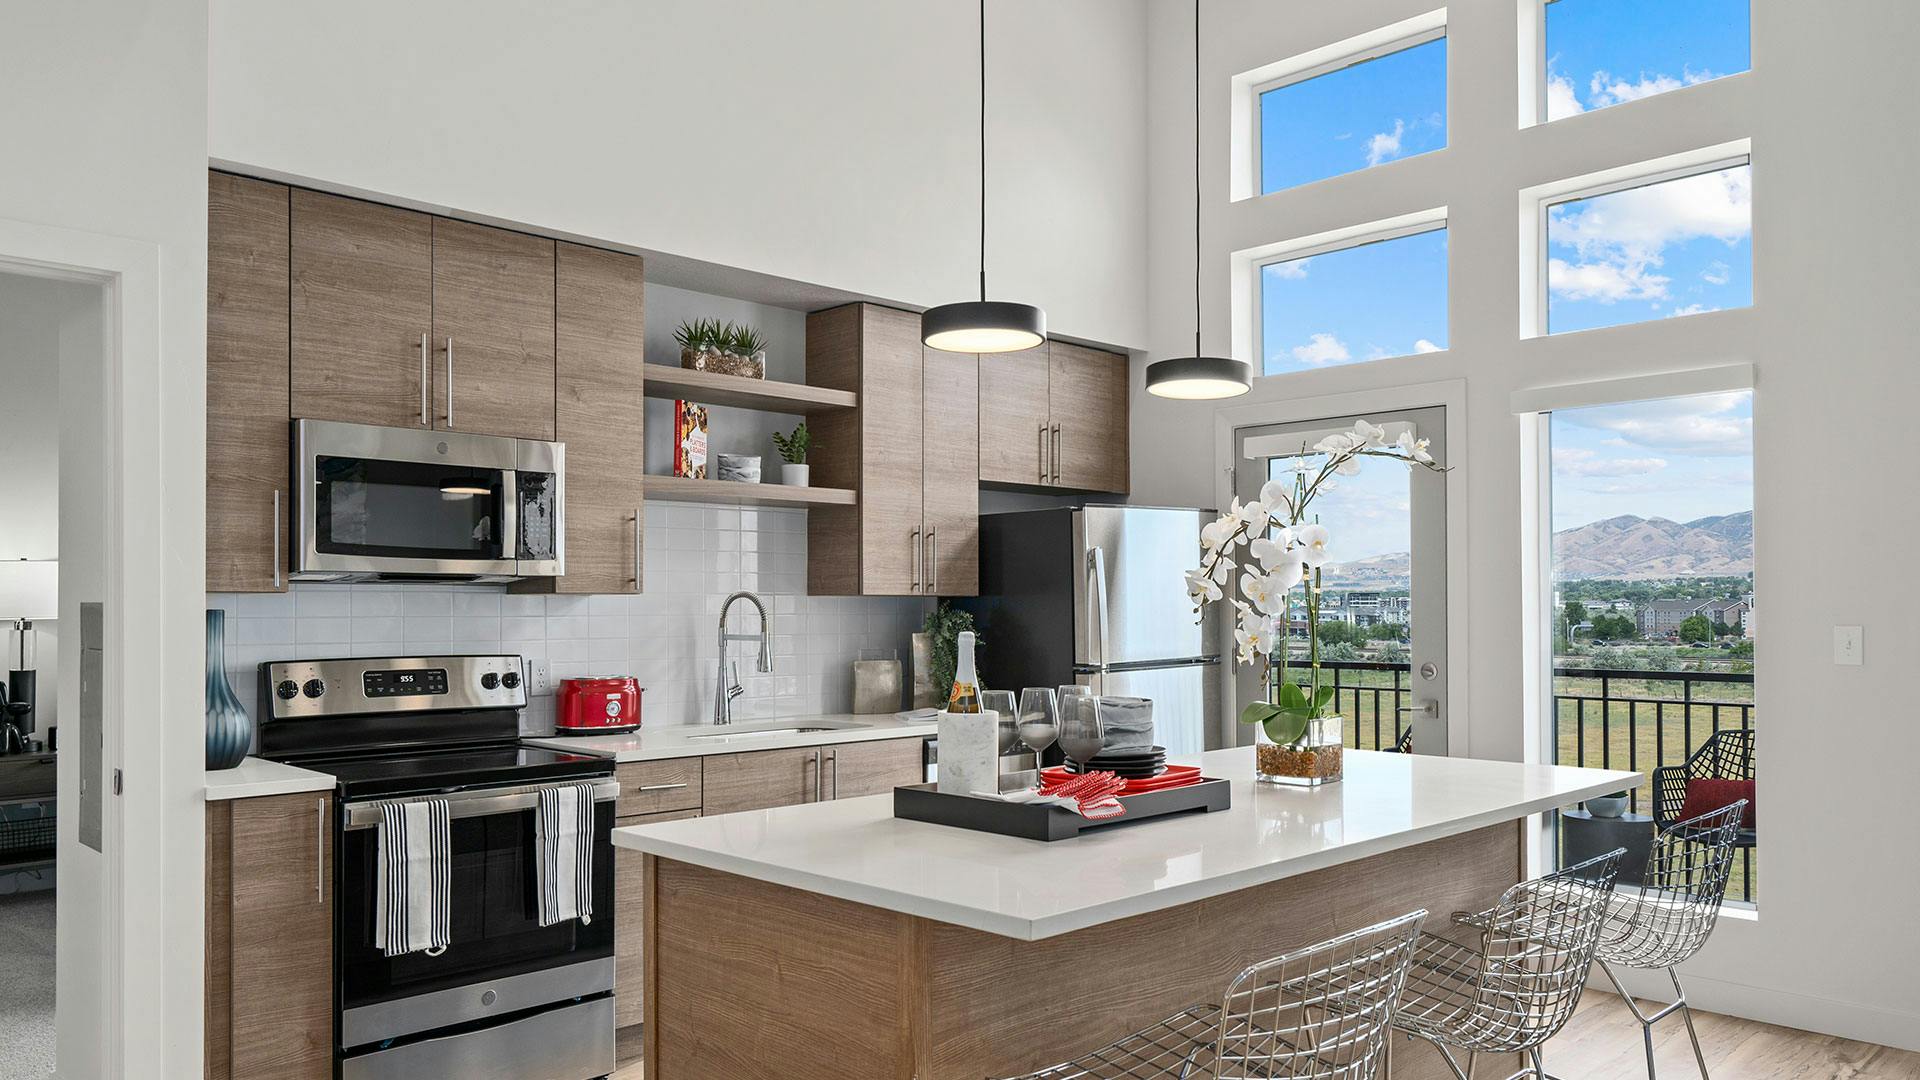 Model Apartment Kitchen at Ely at American Fork